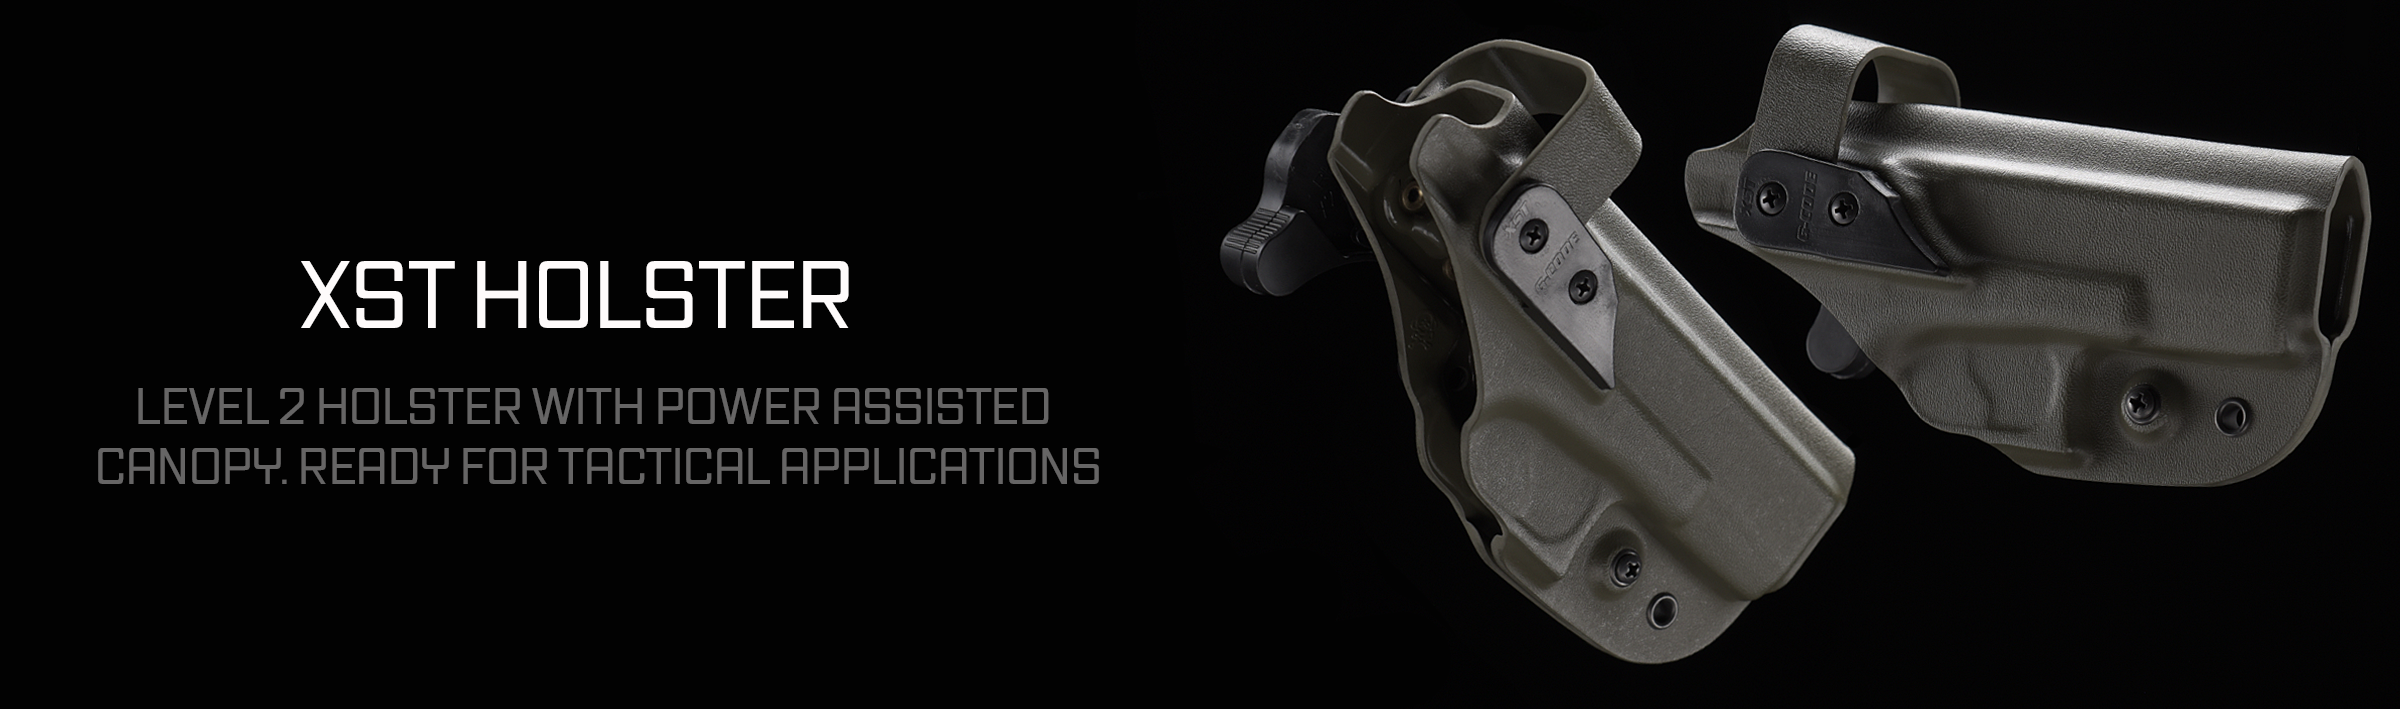 XST Series Holsters - tactical holsters and equipment